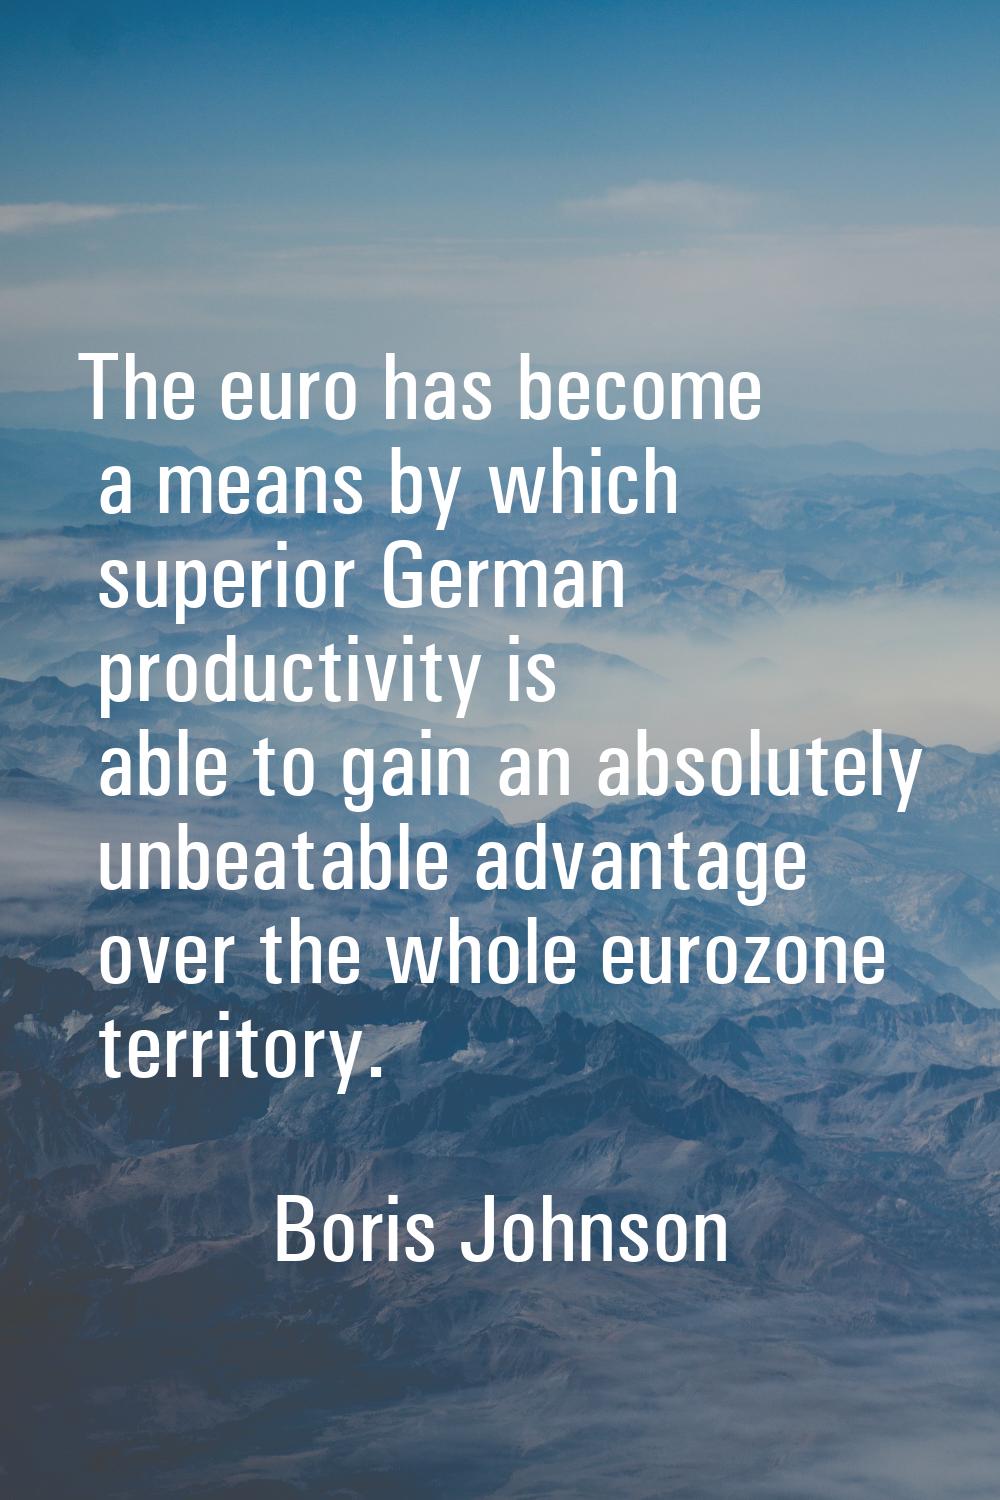 The euro has become a means by which superior German productivity is able to gain an absolutely unb